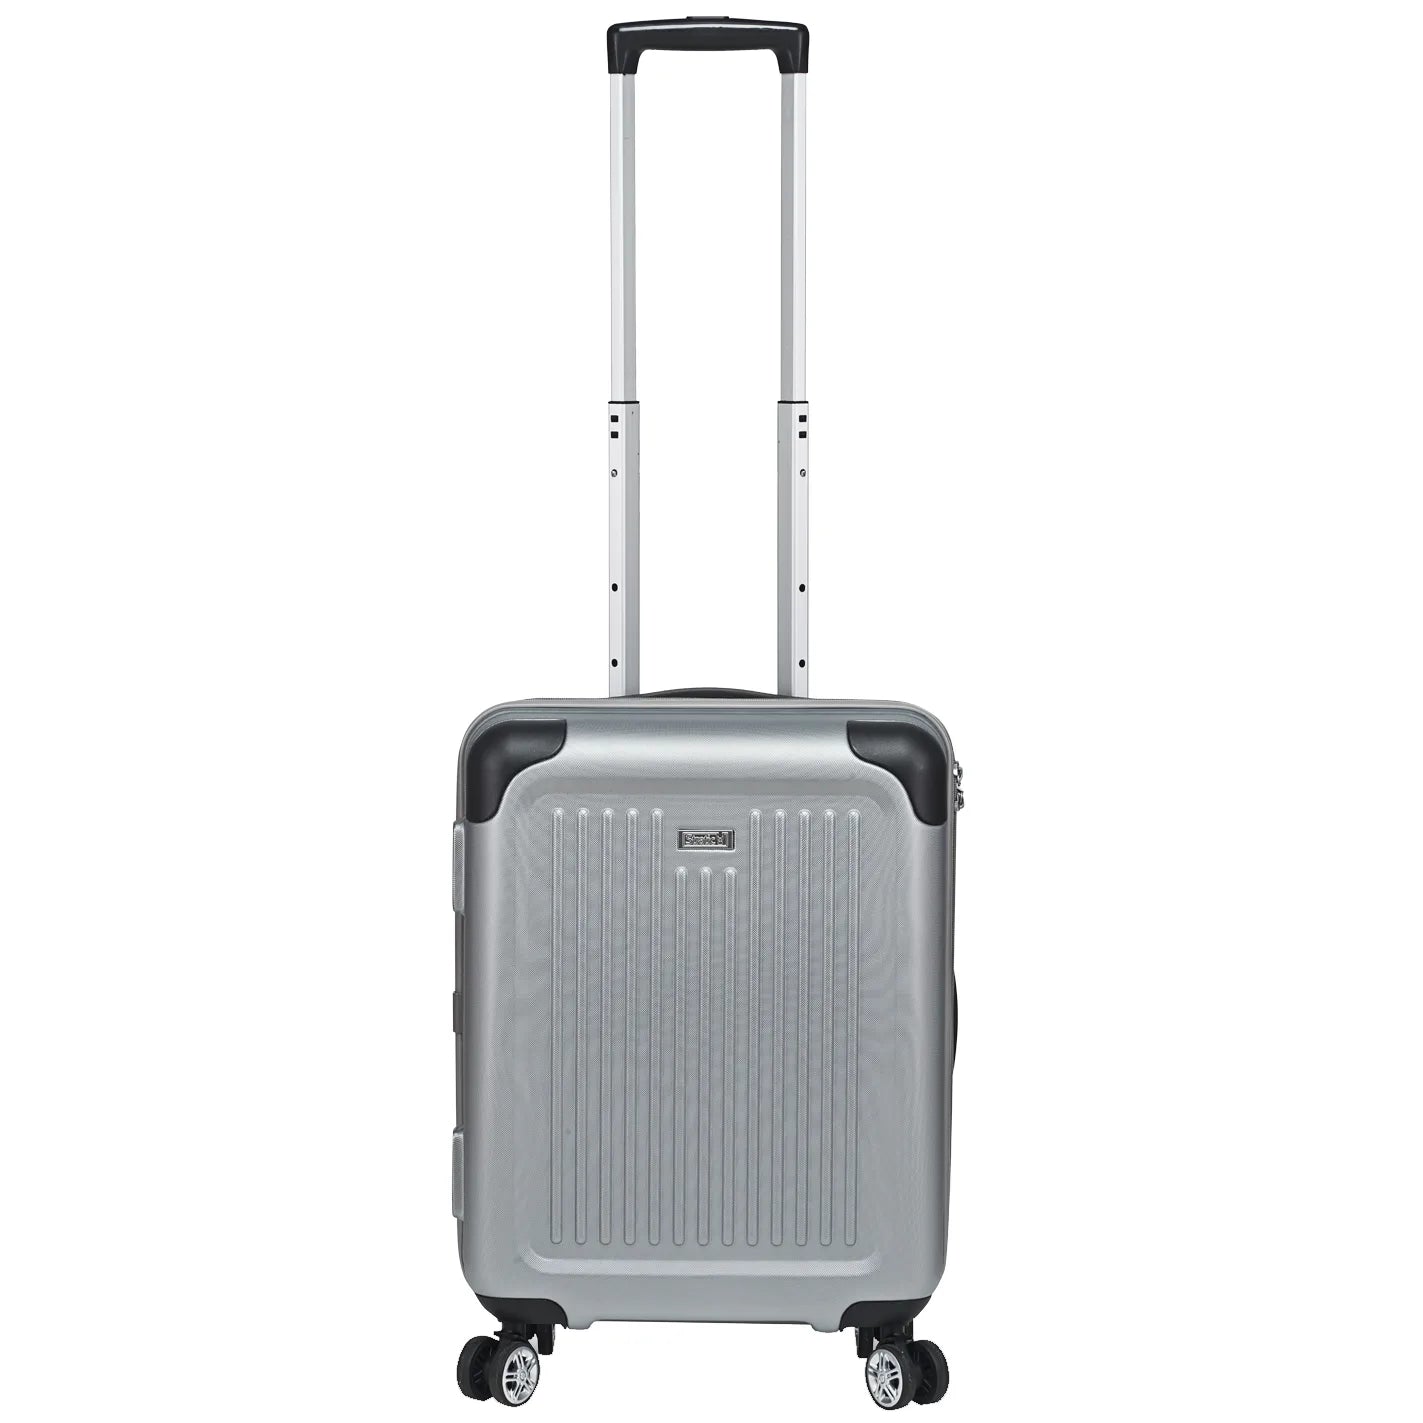 Valise cabine 4 roues Stratic Stripe 54 cm - Argent